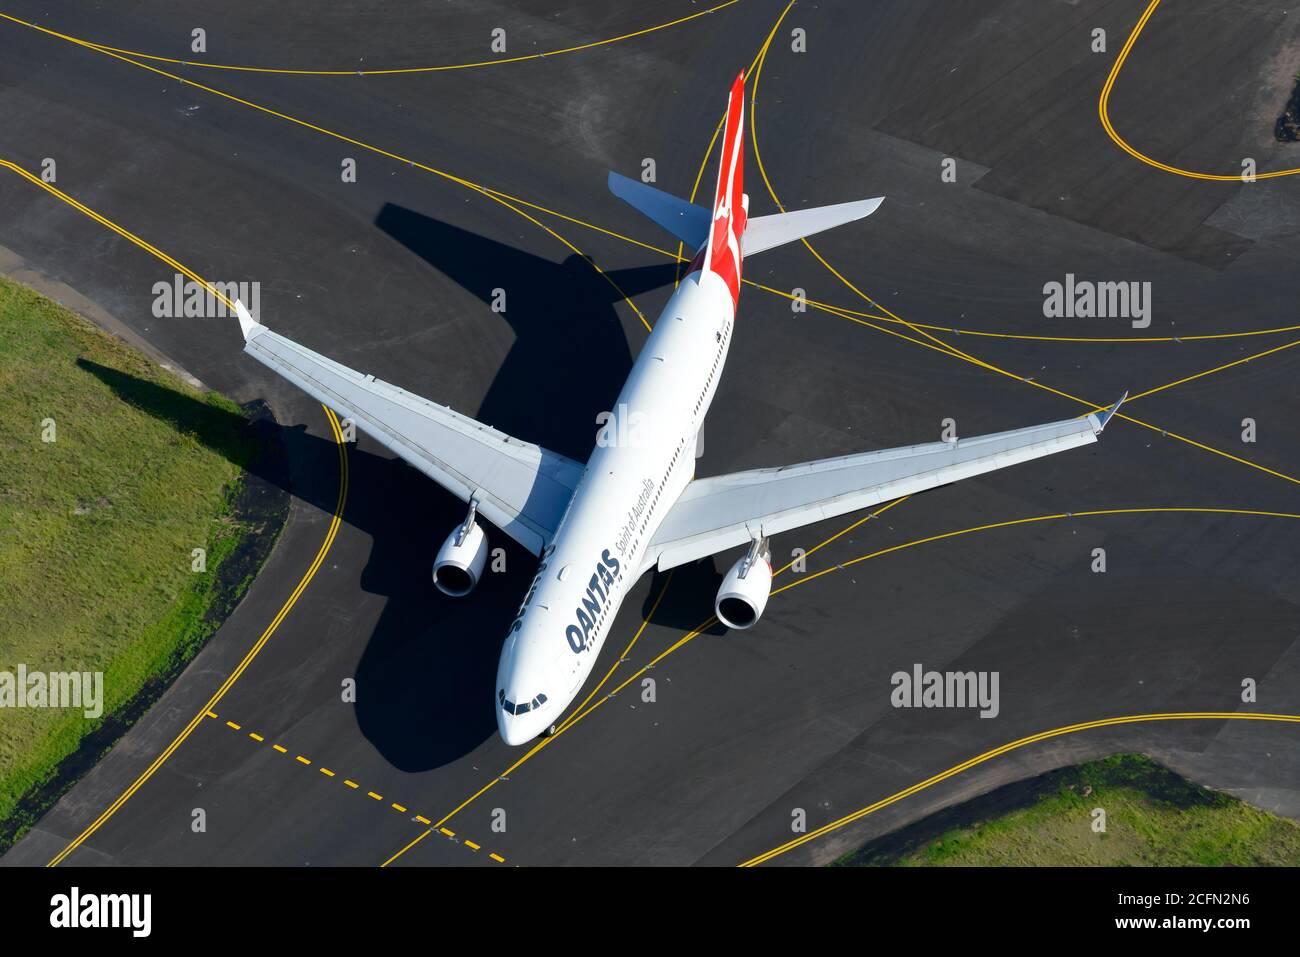 Qantas Airways Airbus A330 aerial view. Aircraft of Qantas and taxiway lines at Sydney Airport, Australia. Stock Photo